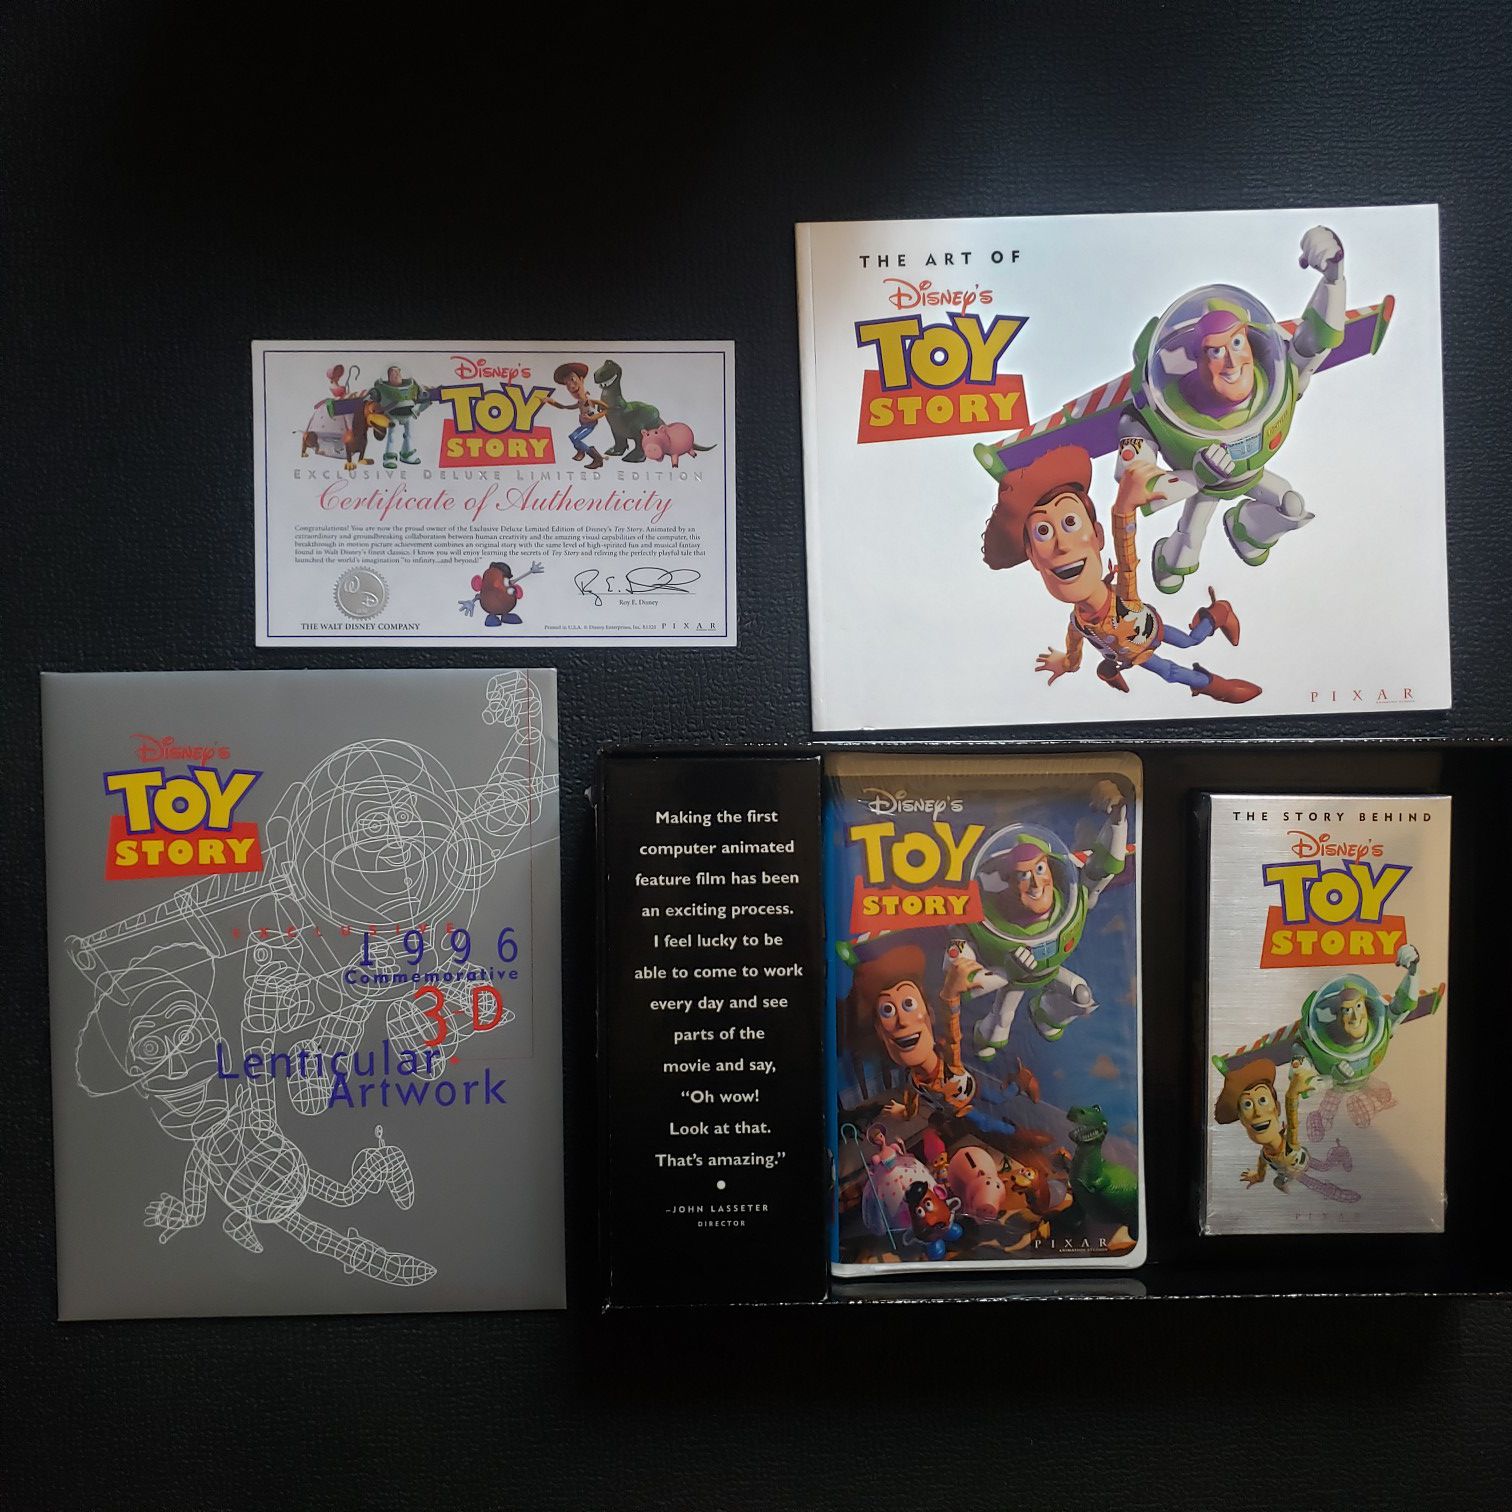 Vintage Toy Story Exclusive Deluxe Video Edition Collectible Set Book Art